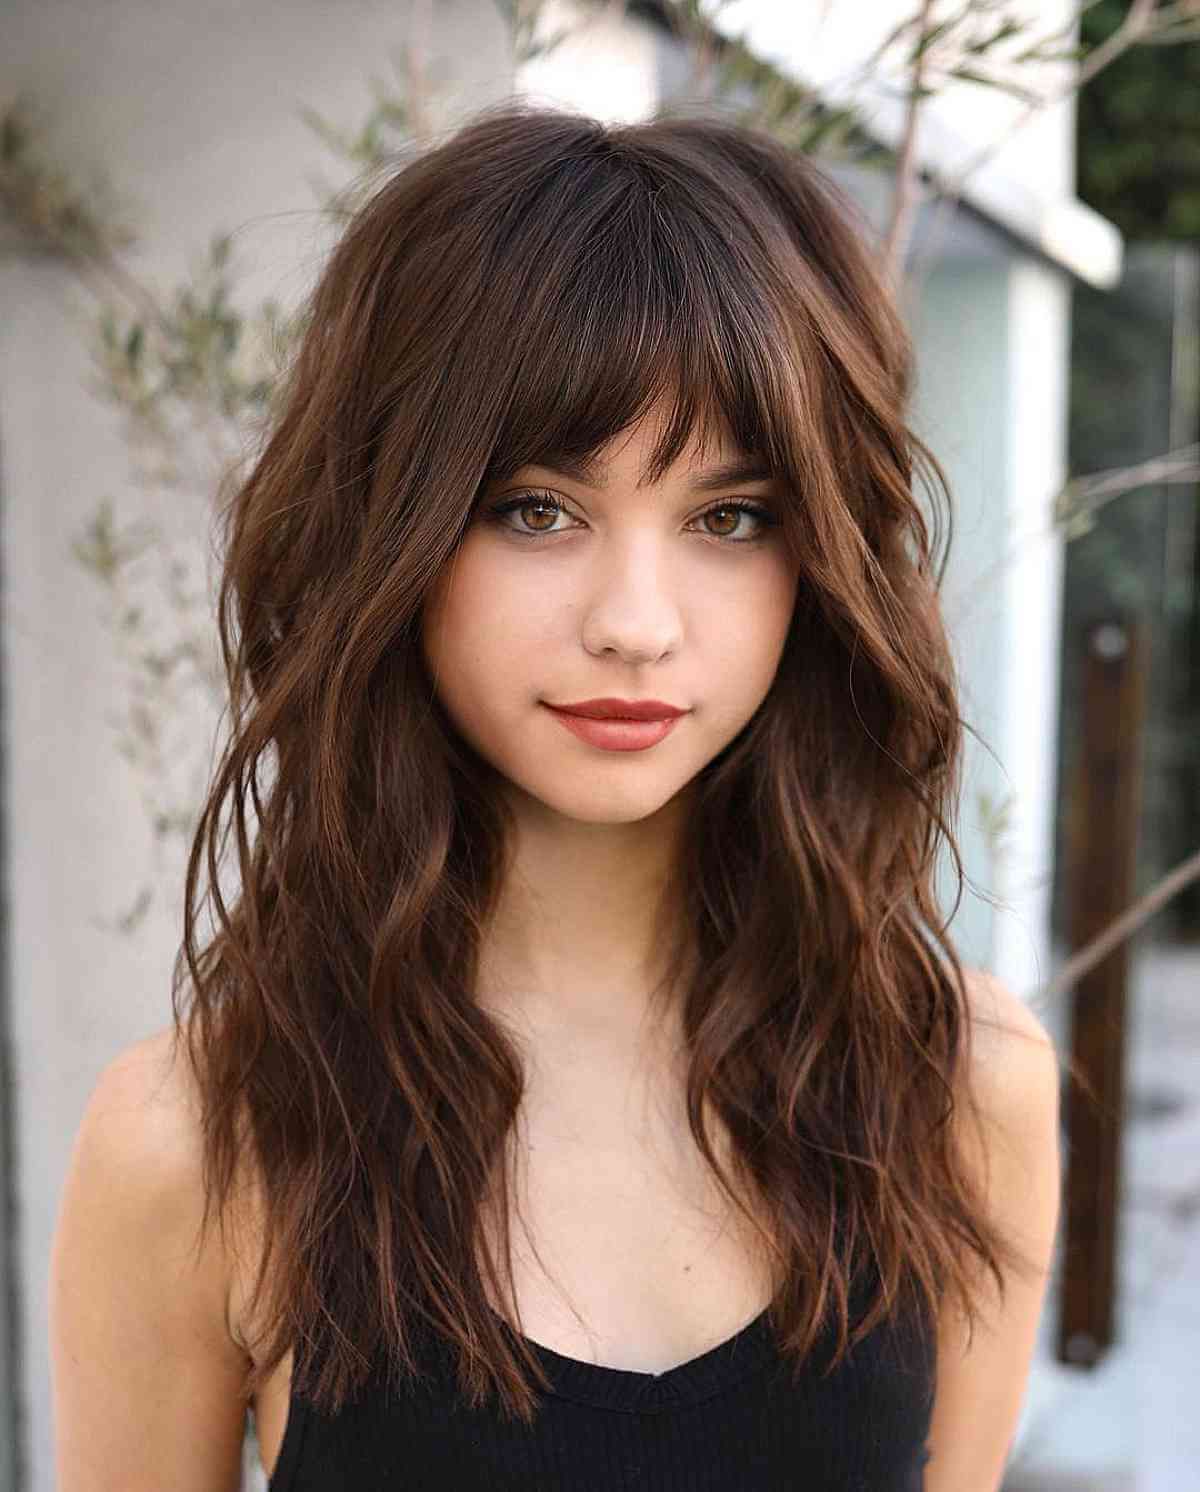 44 Trendy Medium Layered Haircuts With Bangs With 2018 Dip Dye Medium Layered Hair With Bangs (Gallery 11 of 15)